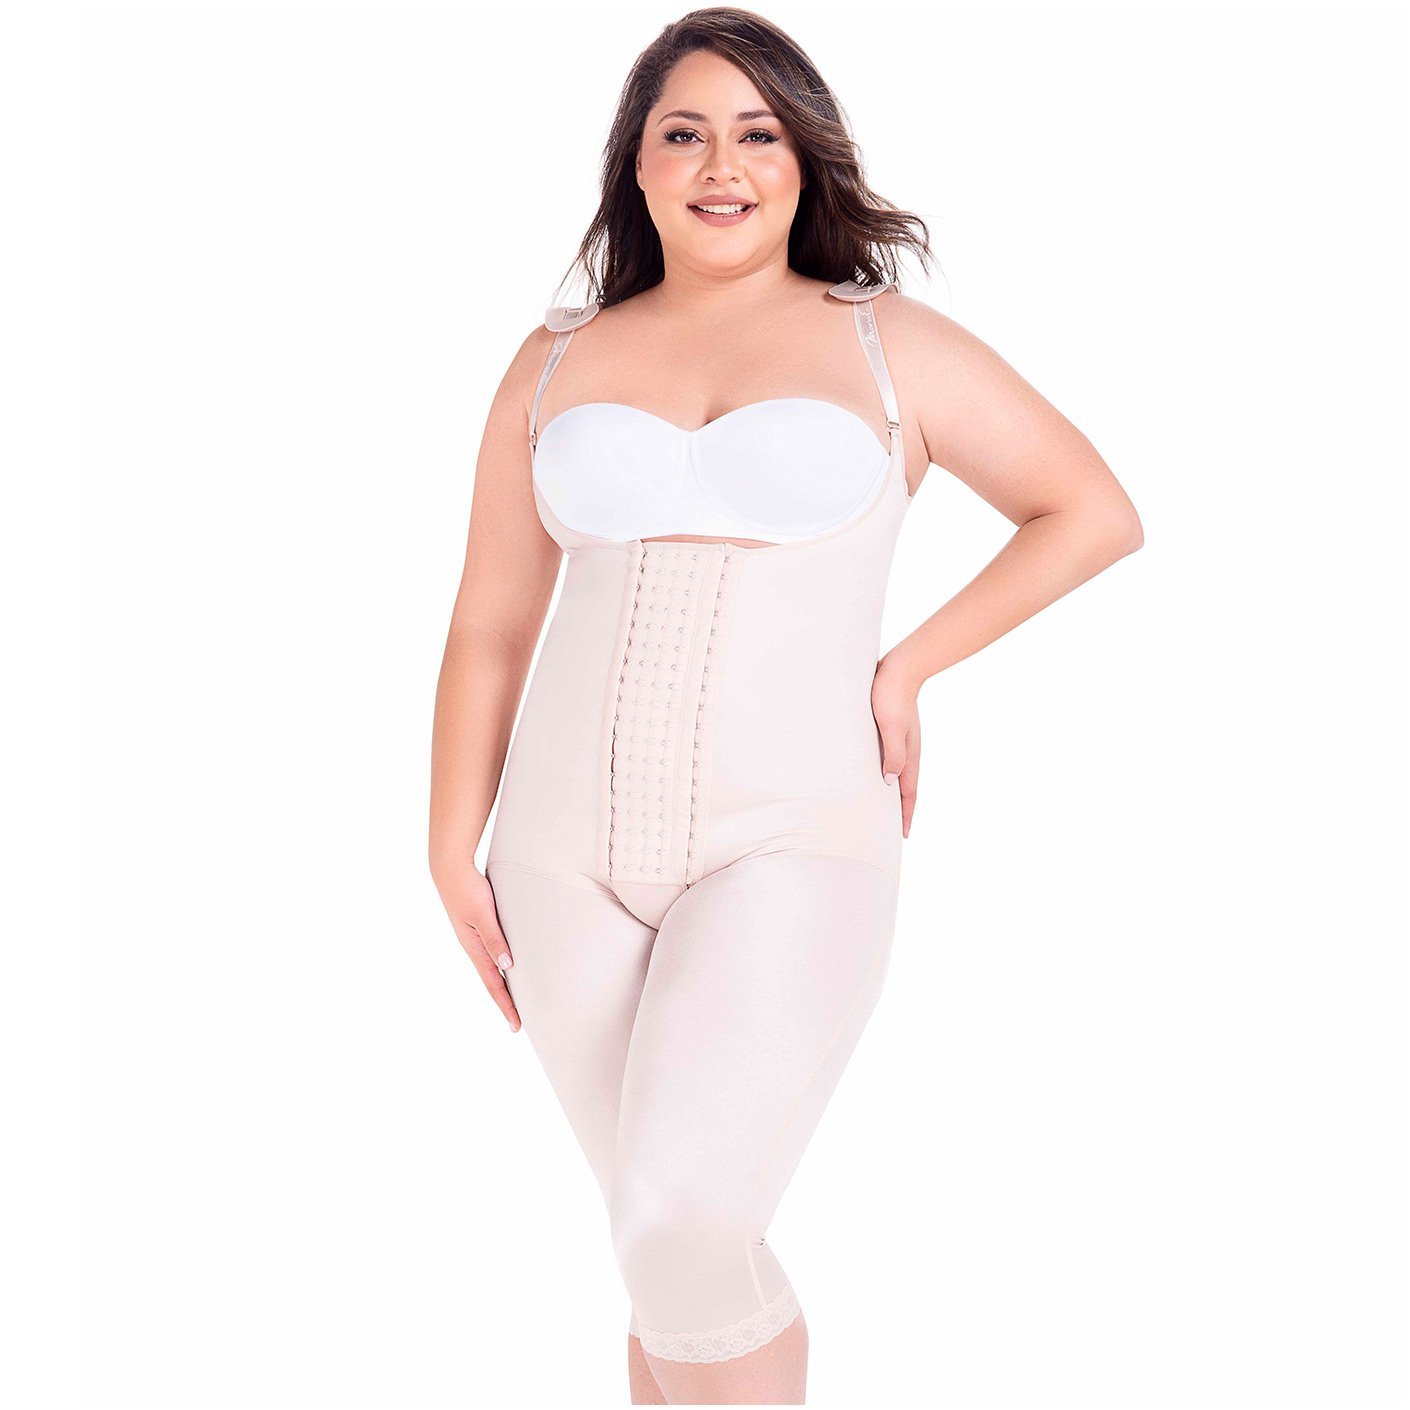 MariaE 9312 Full Body Shaper with Strap Cushions - New England Supplier